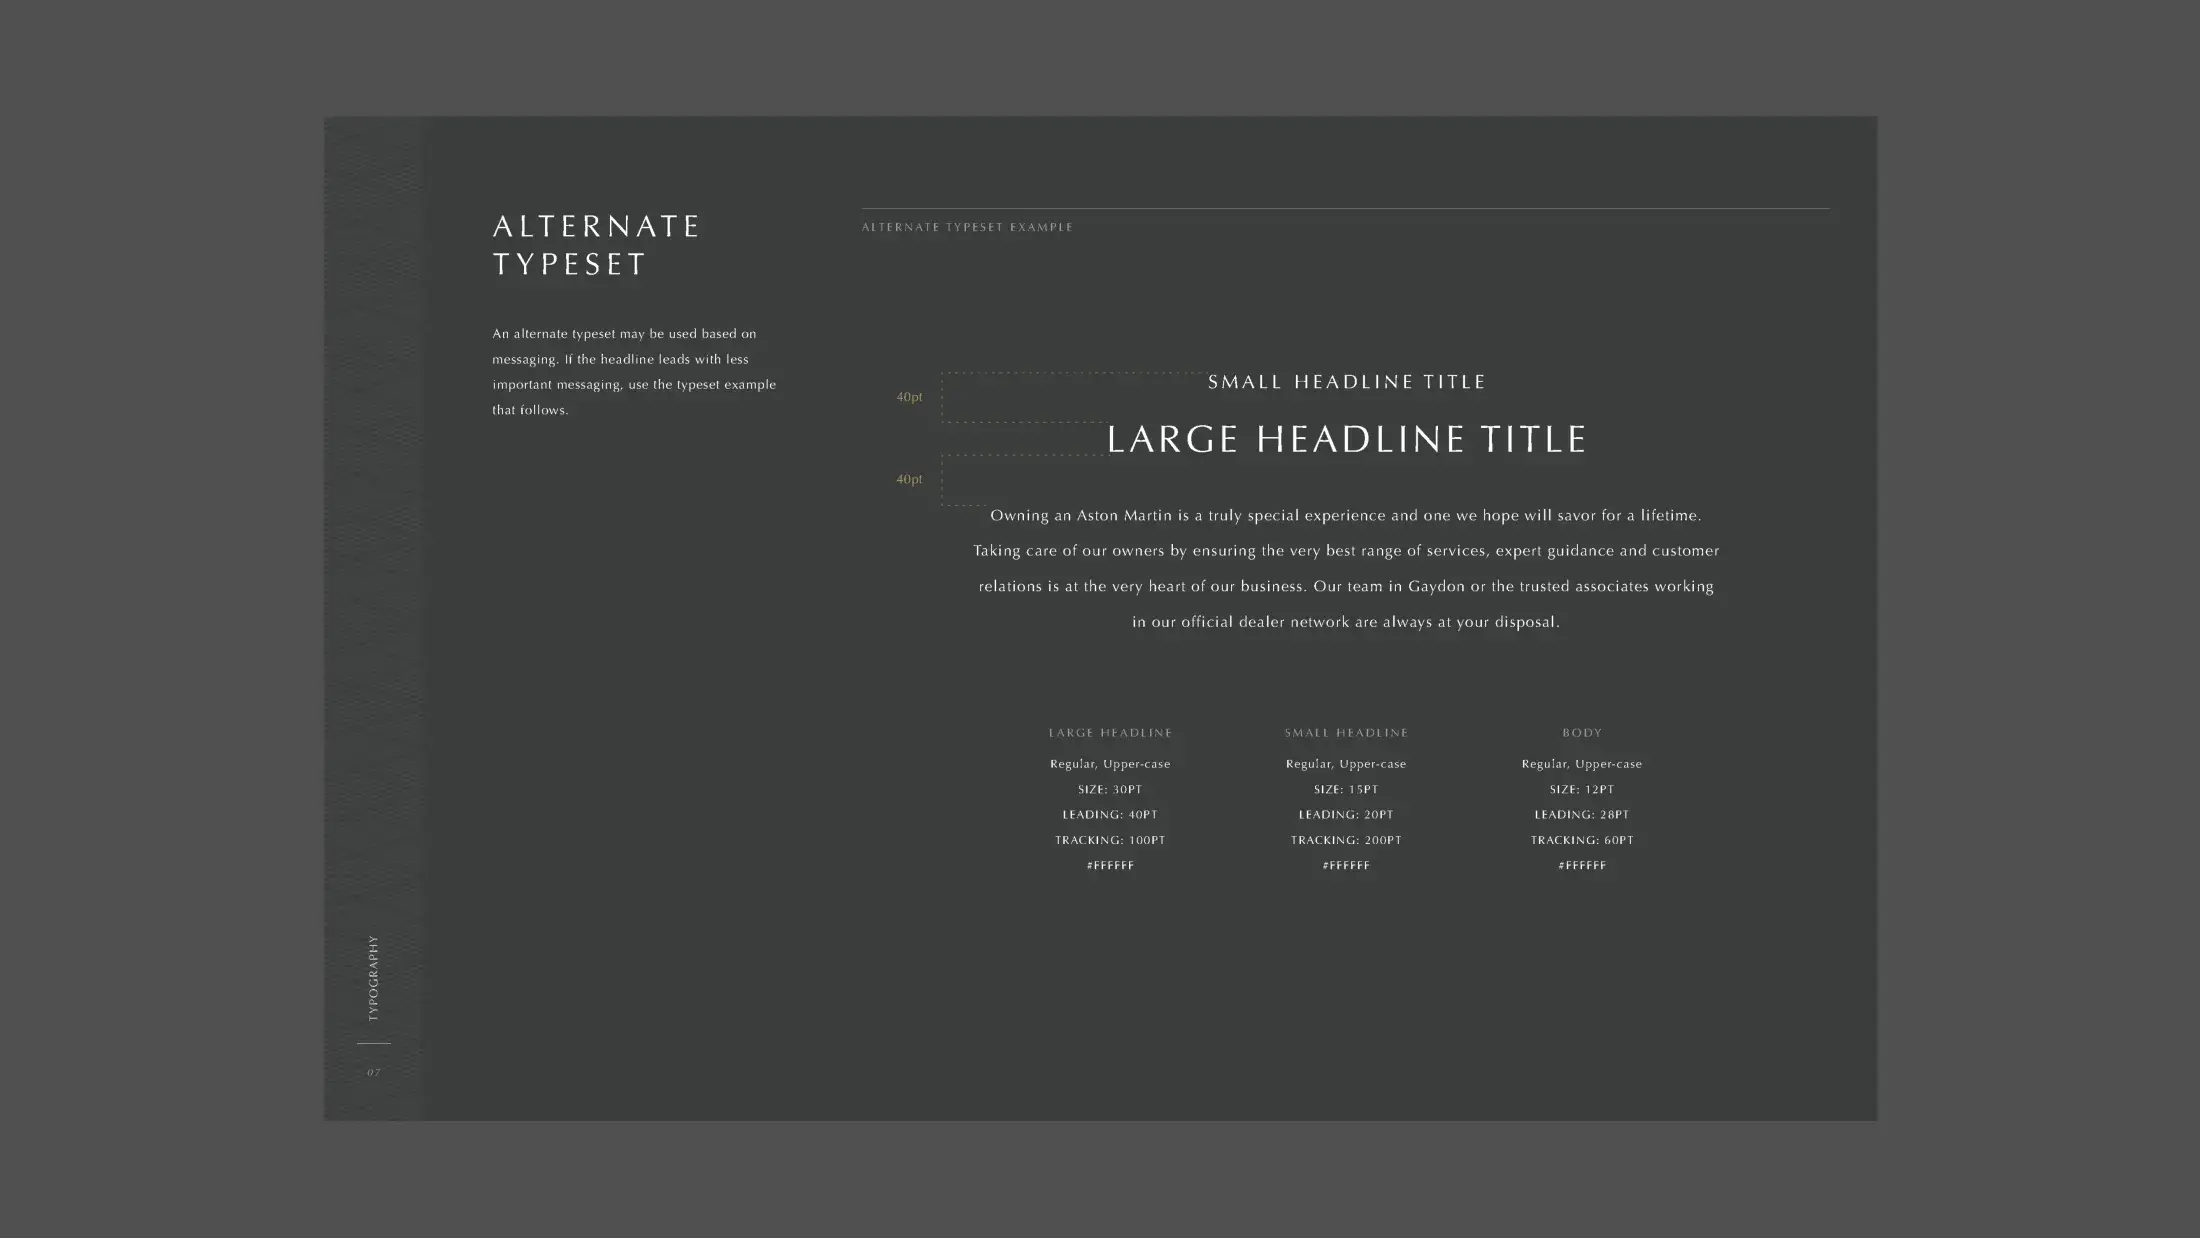 Style guide page on typography, primary typeset